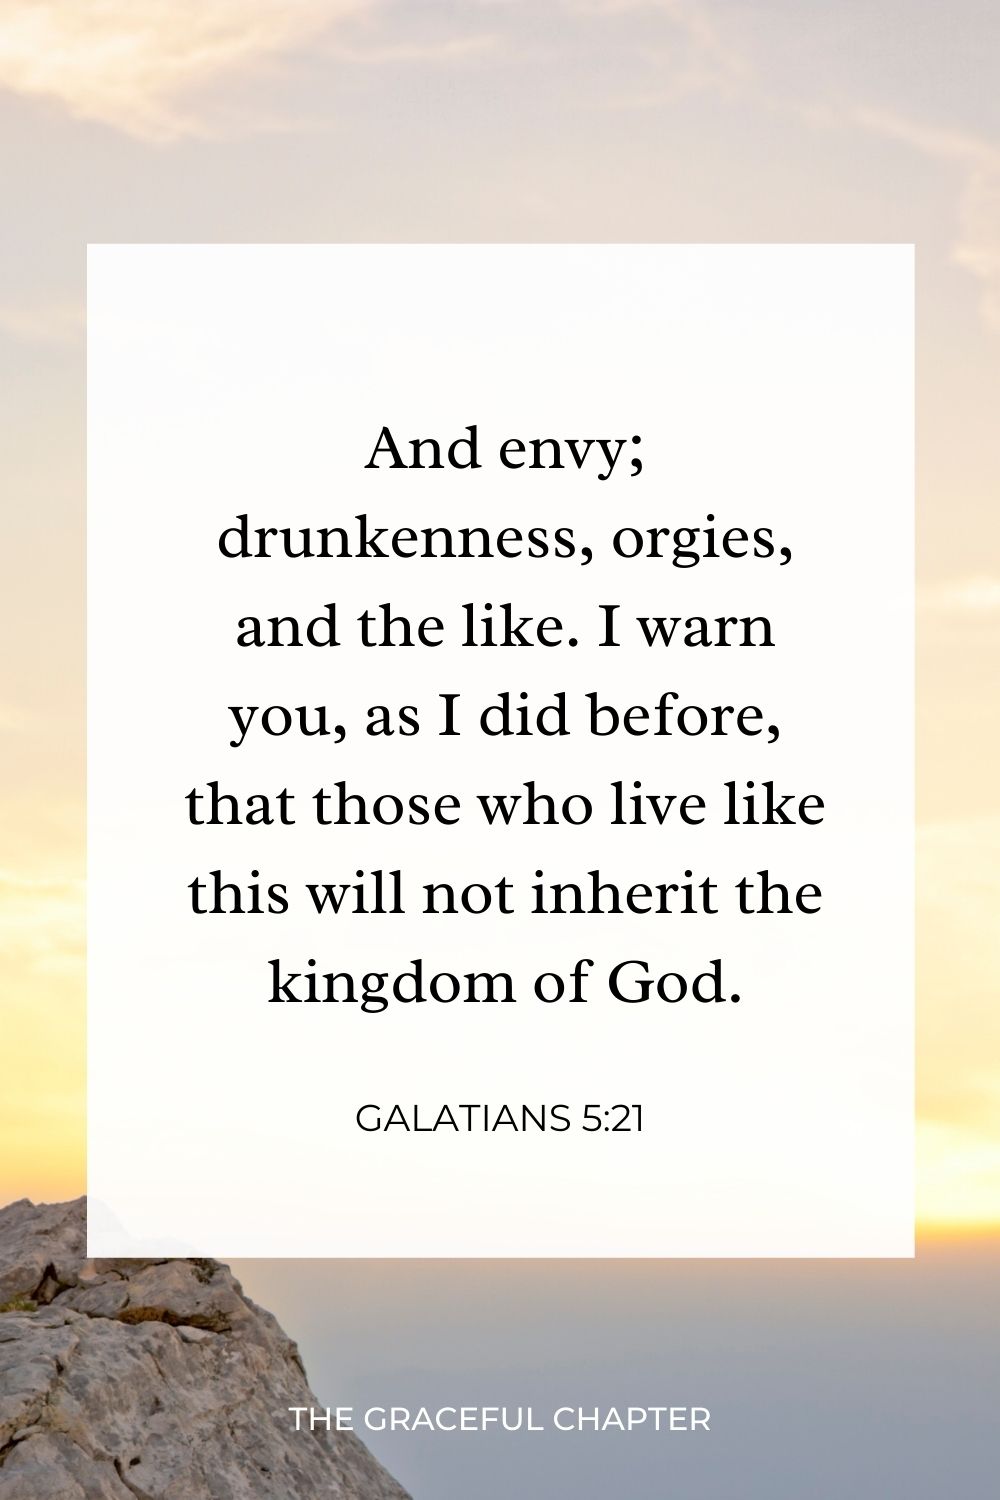 And envy; drunkenness, orgies, and the like. I warn you, as I did before, that those who live like this will not inherit the kingdom of God. Galatians 5:21